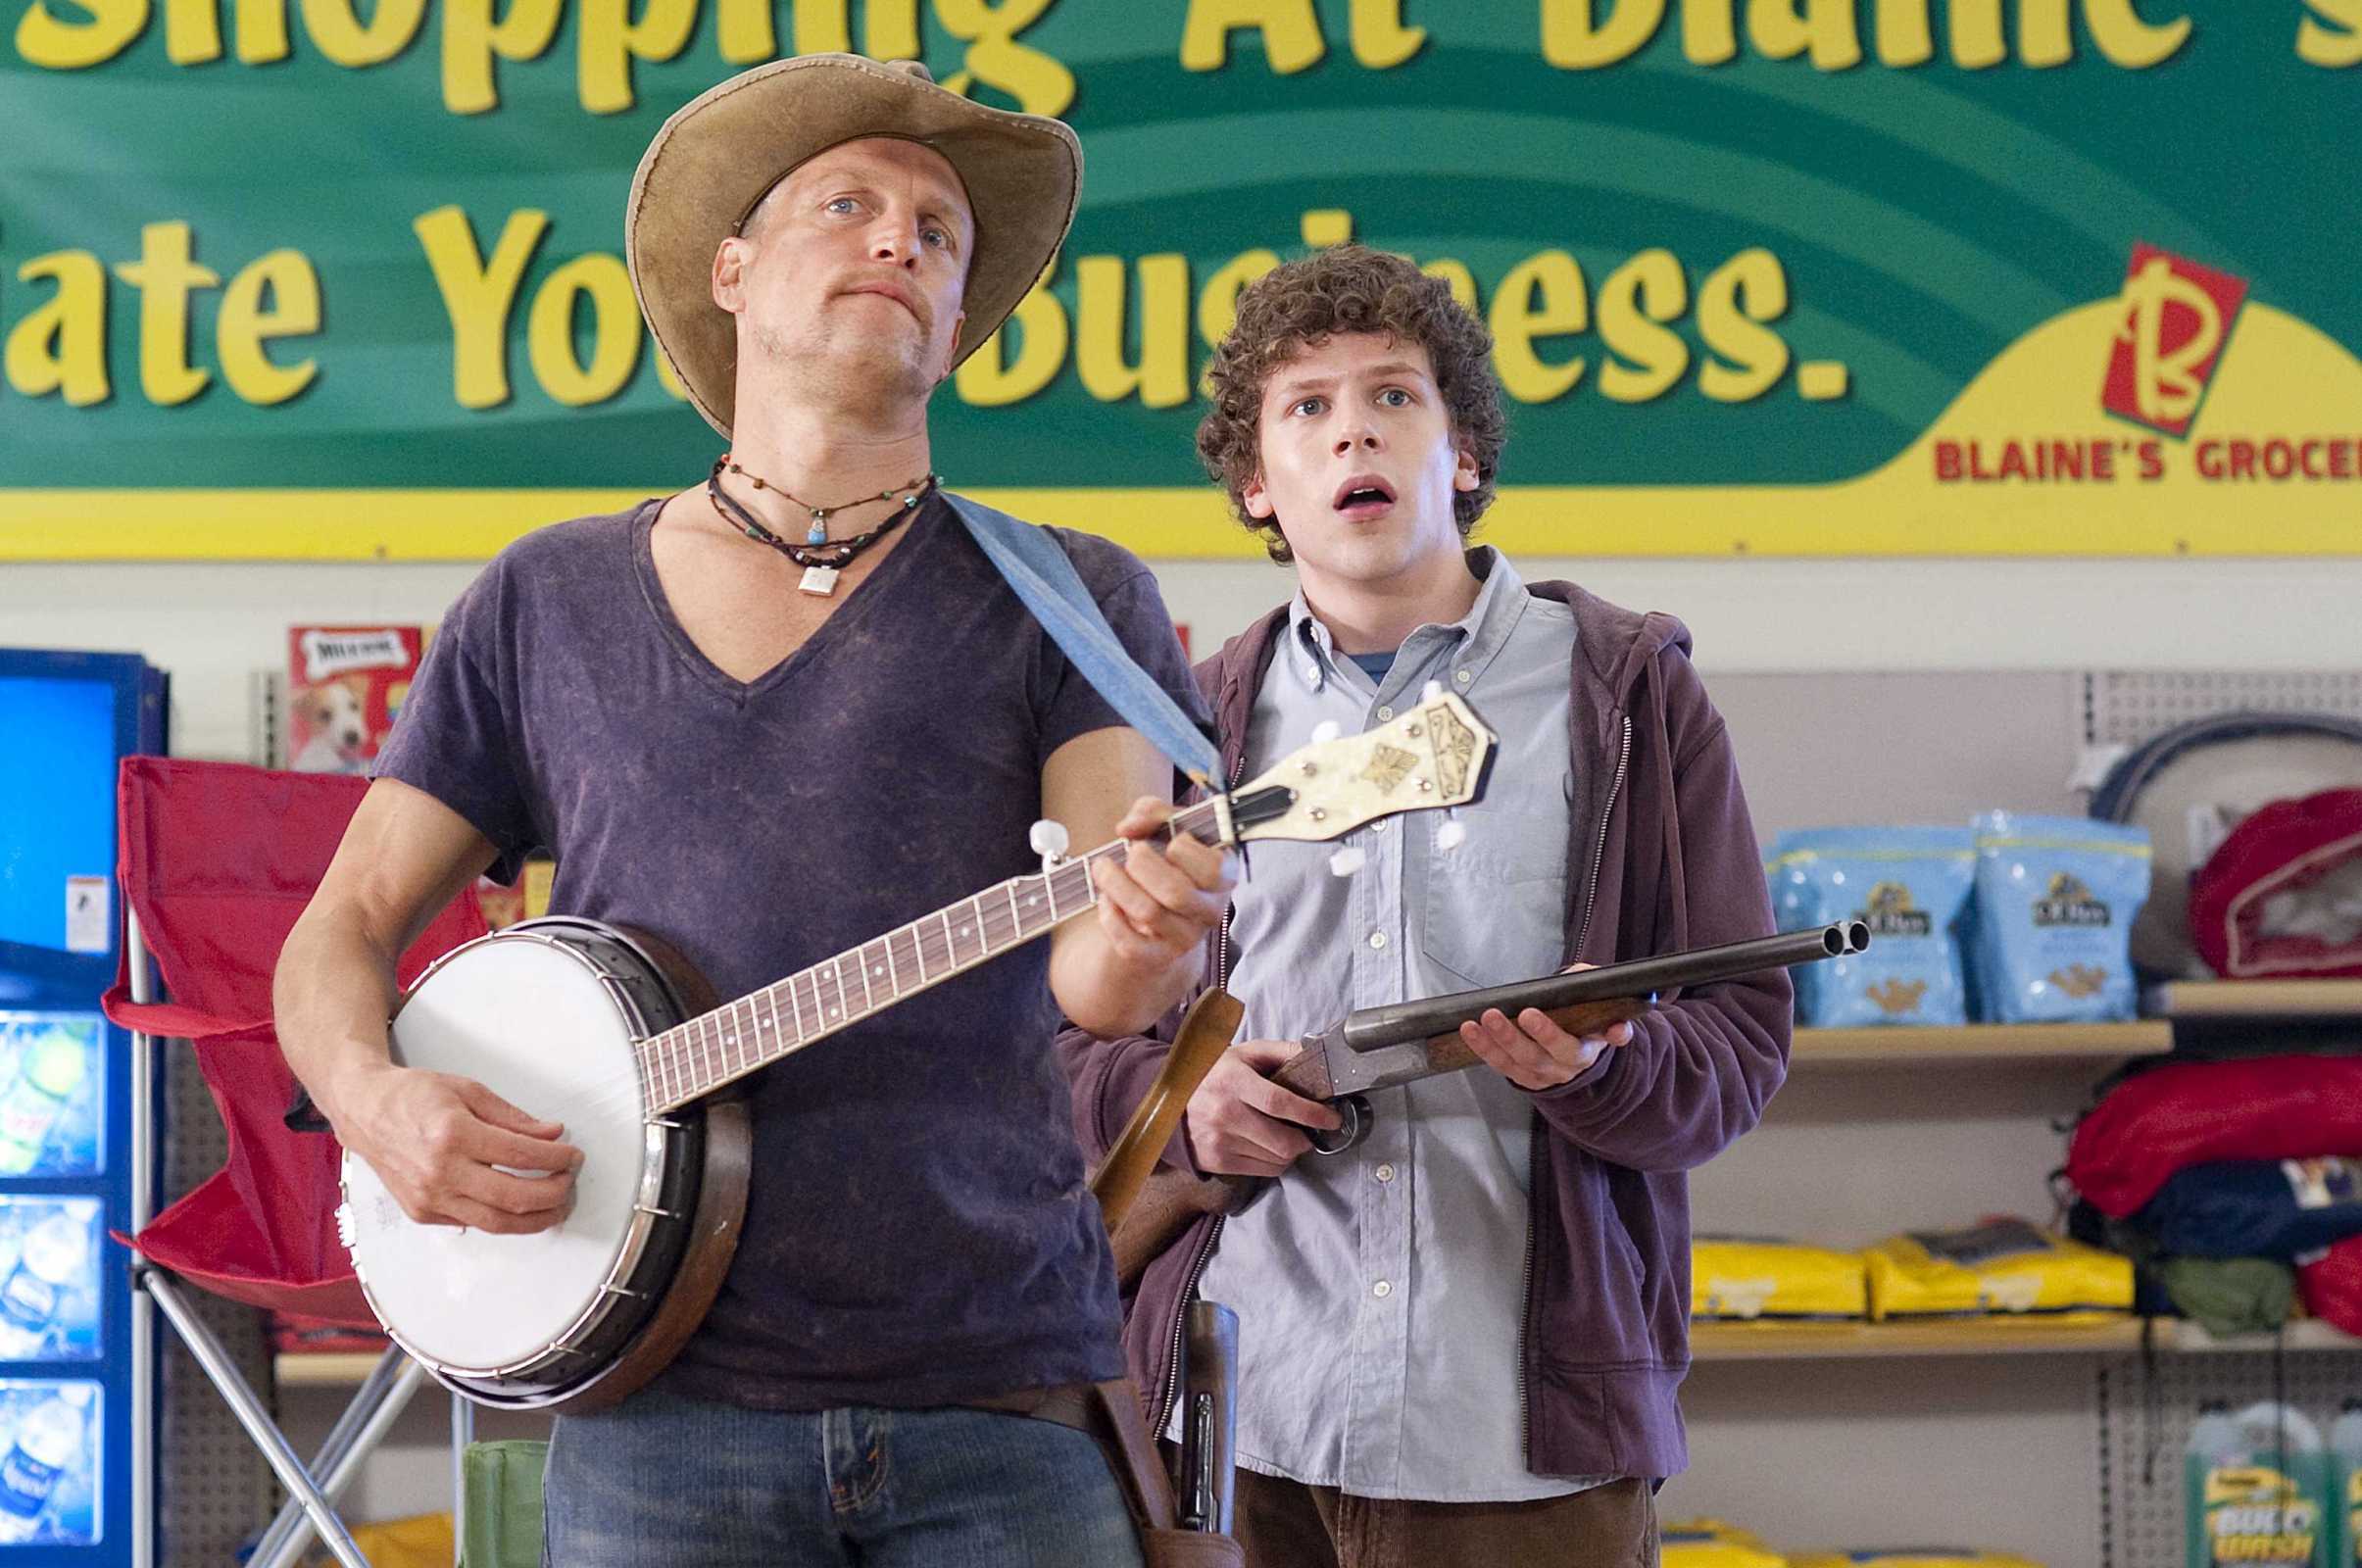 Zombieland Image Stills HD Wallpaper And Background